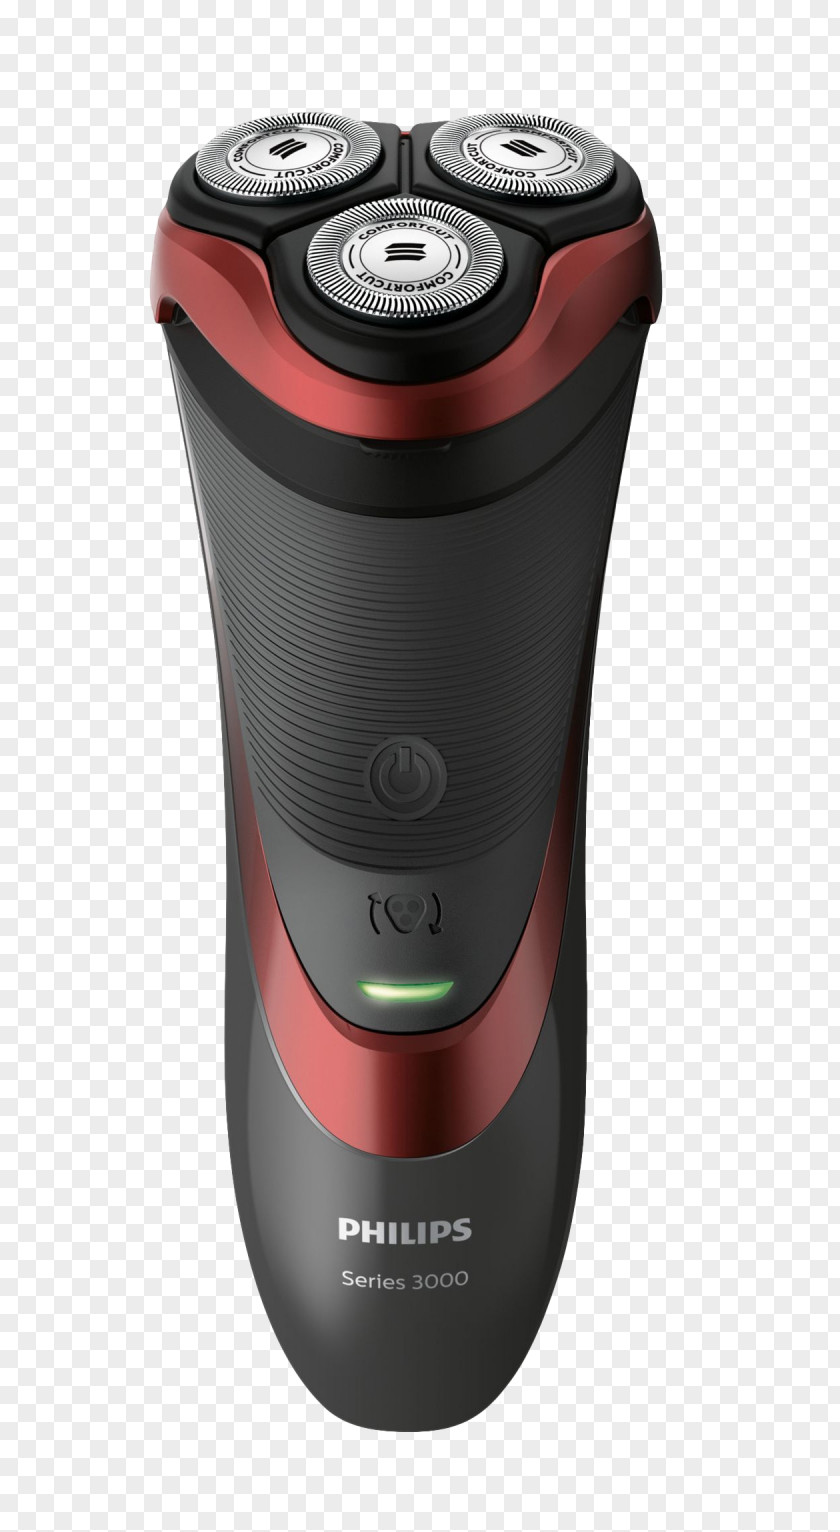 Electric Razors & Hair Trimmers Philips S3580 Rotary Shaver Hairclipper Series 3000 PNG